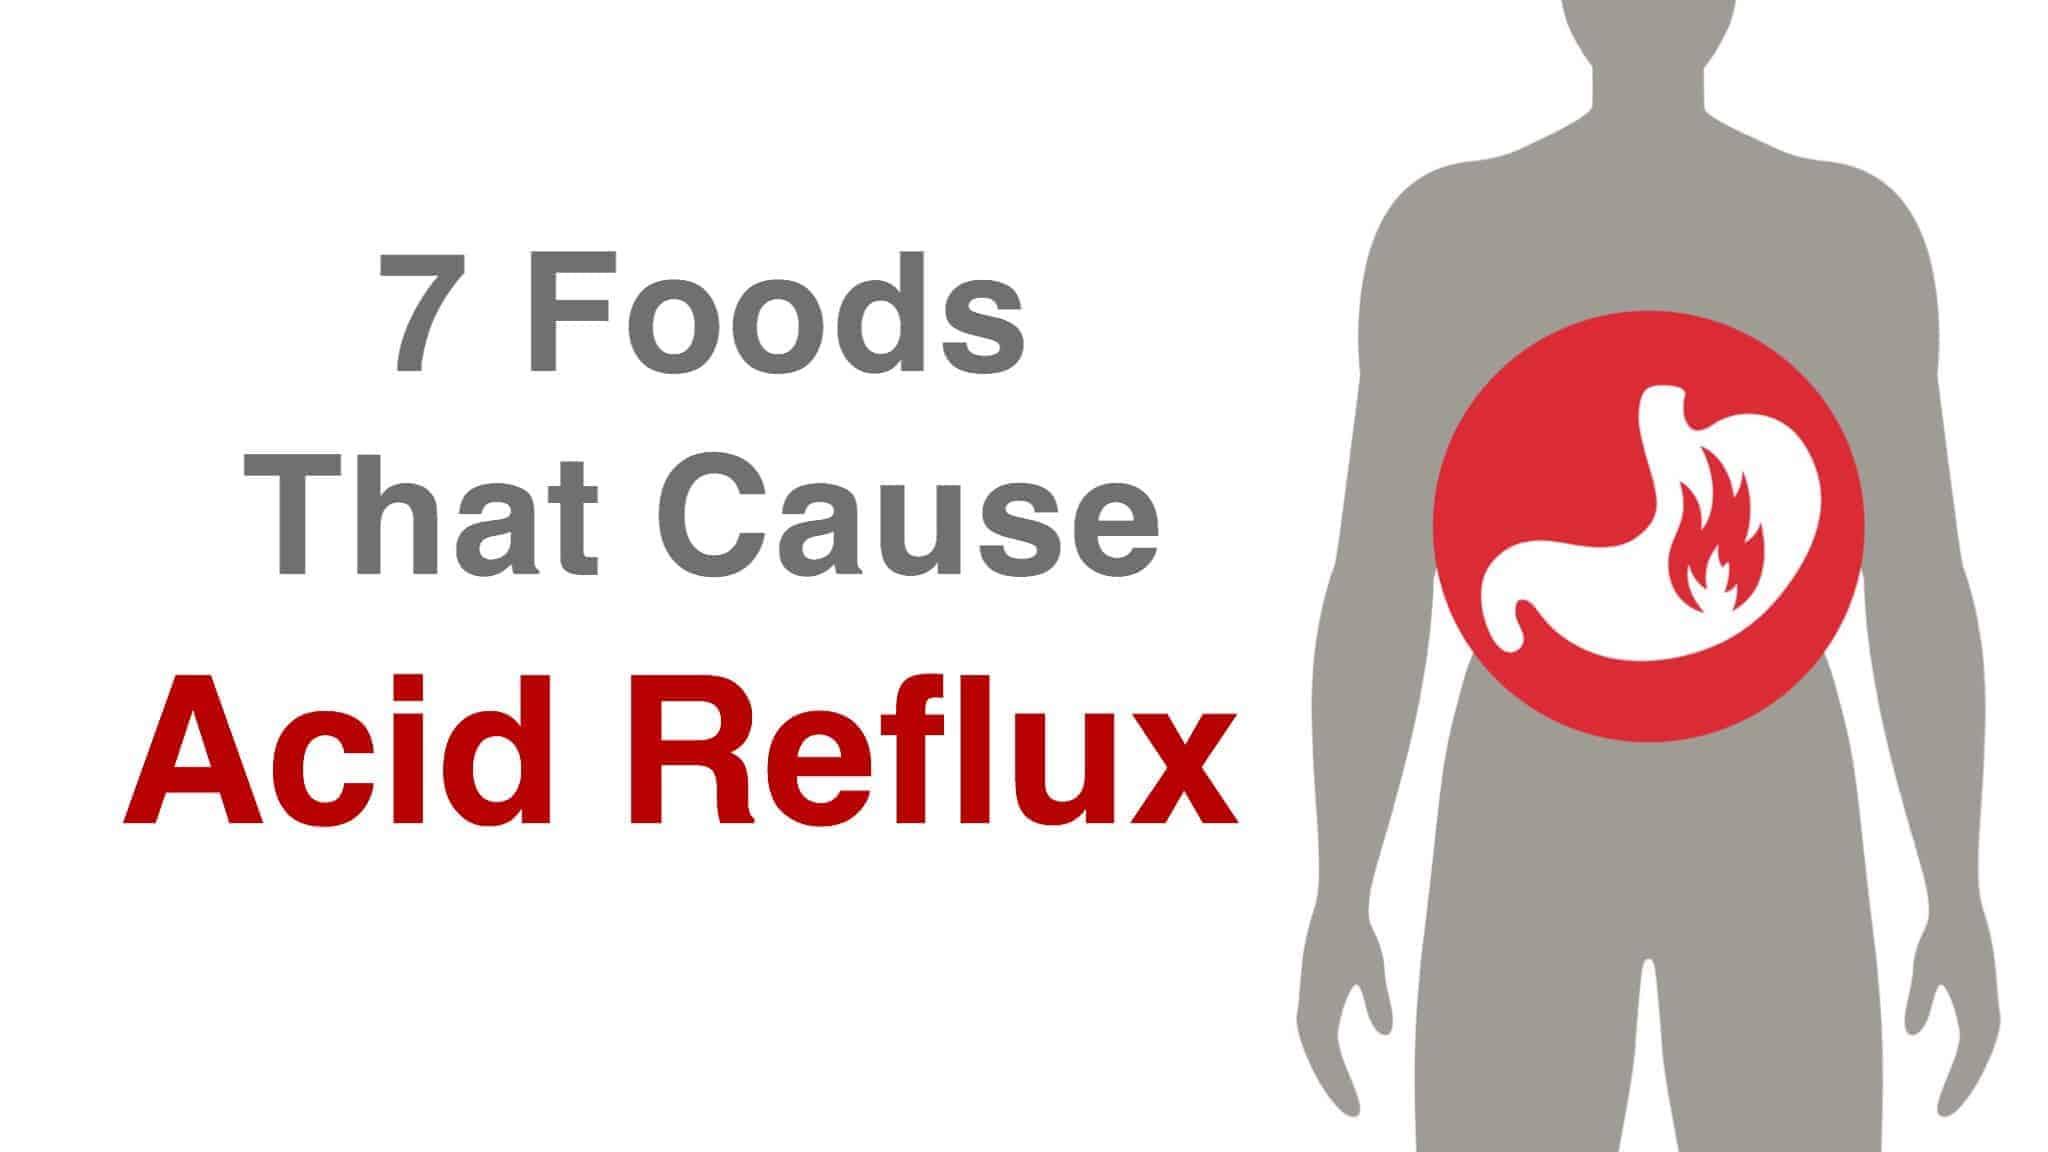 7 Foods That Cause Acid Reflux